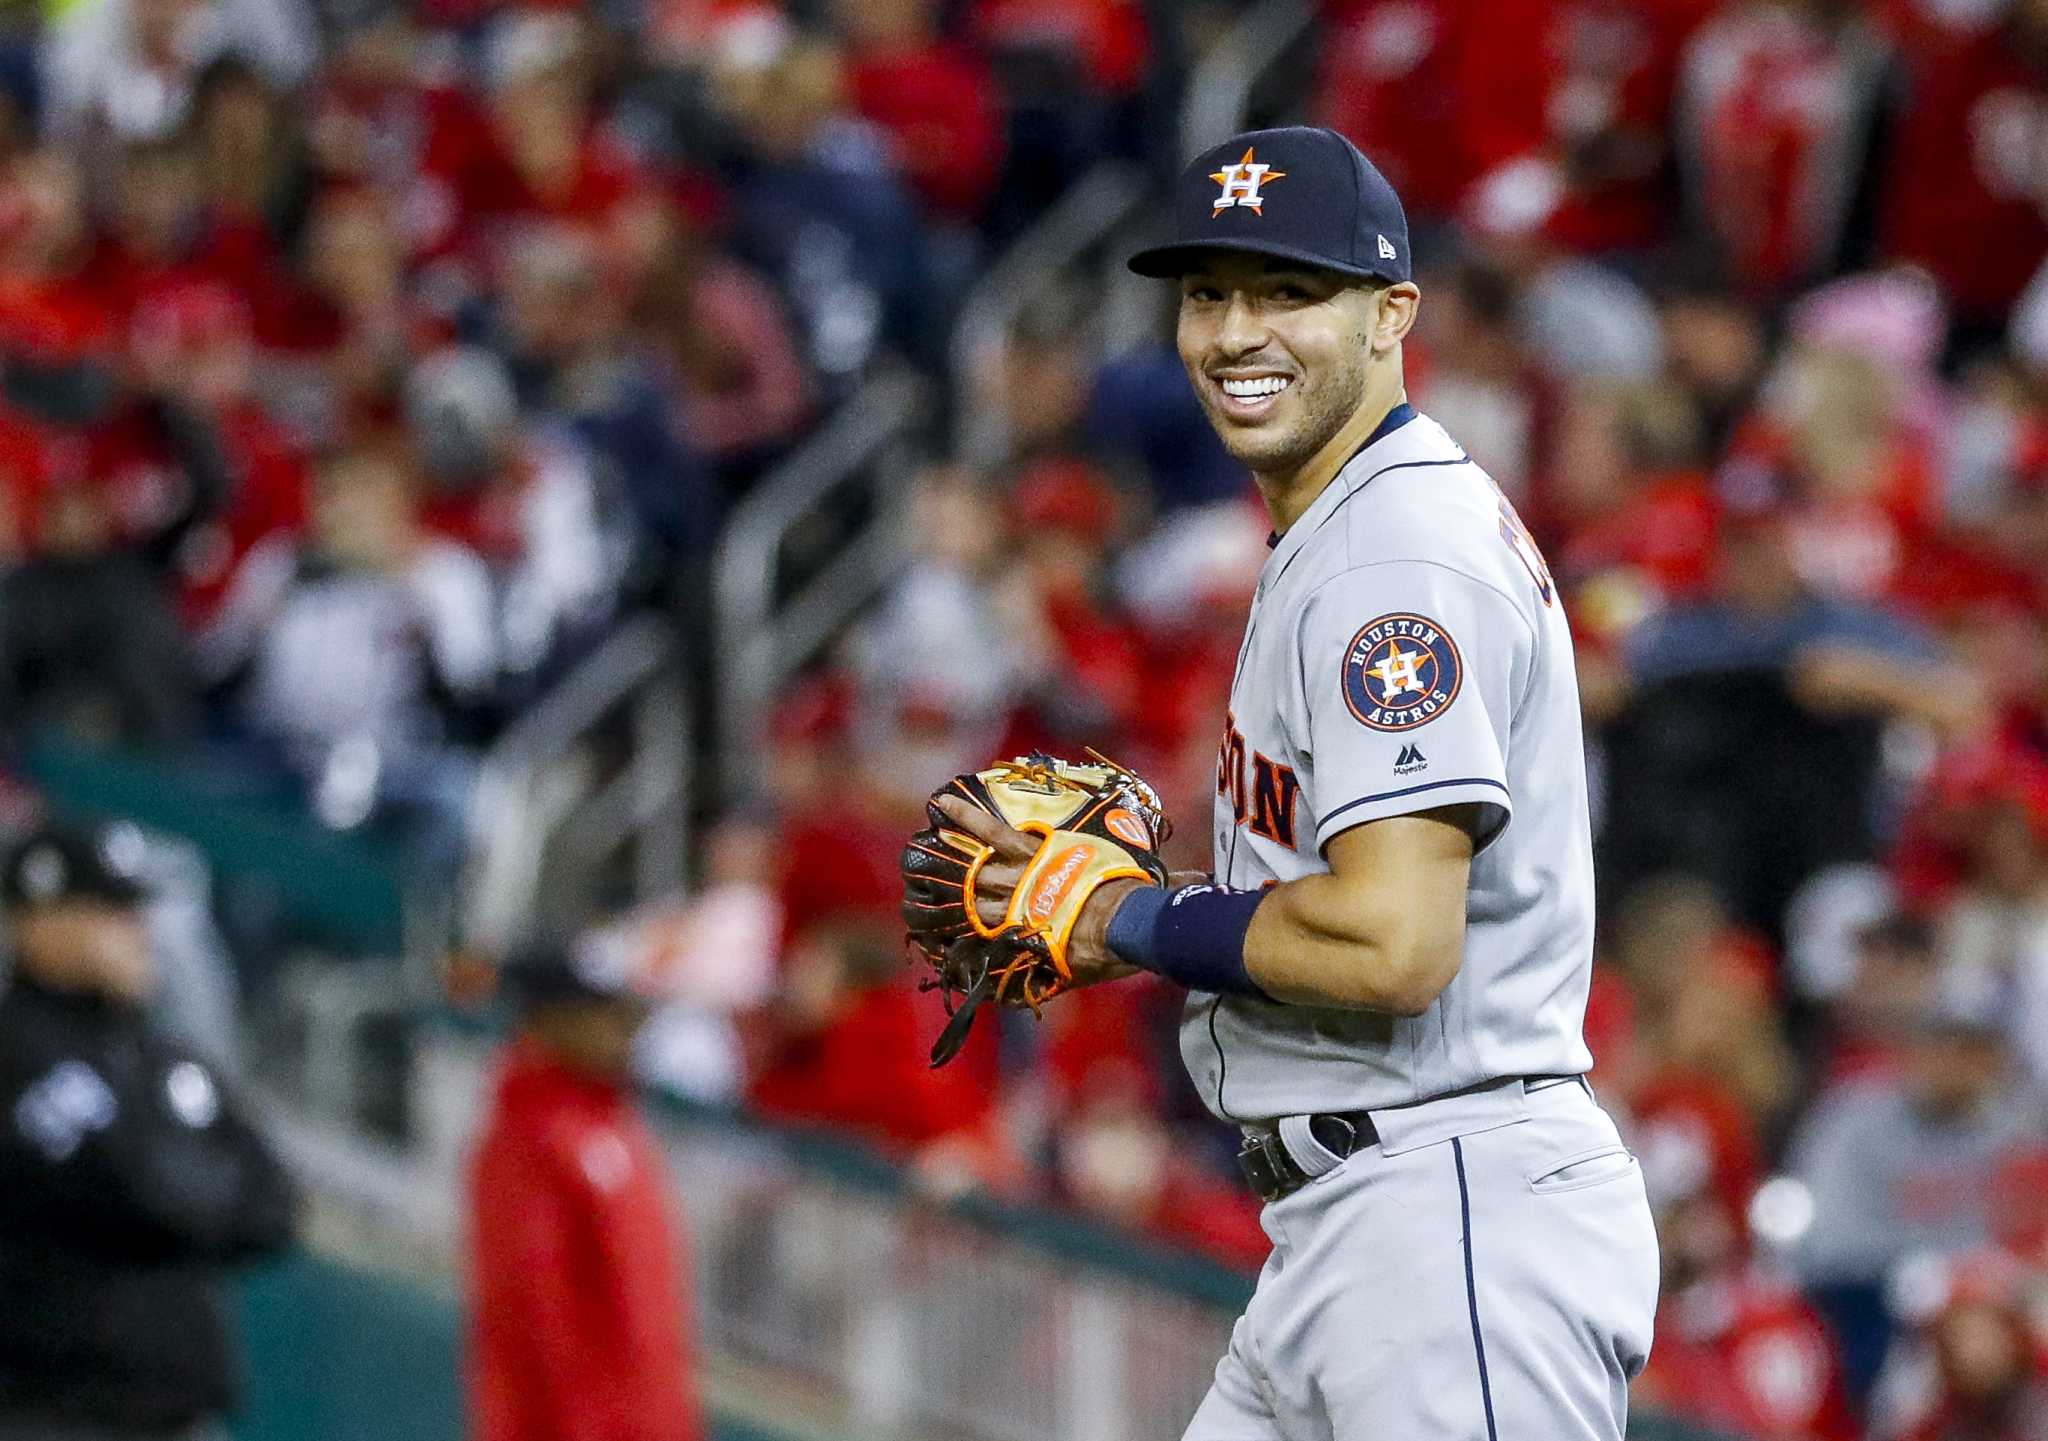 Carlos Correa staying with Astros? Encouraging reports point that